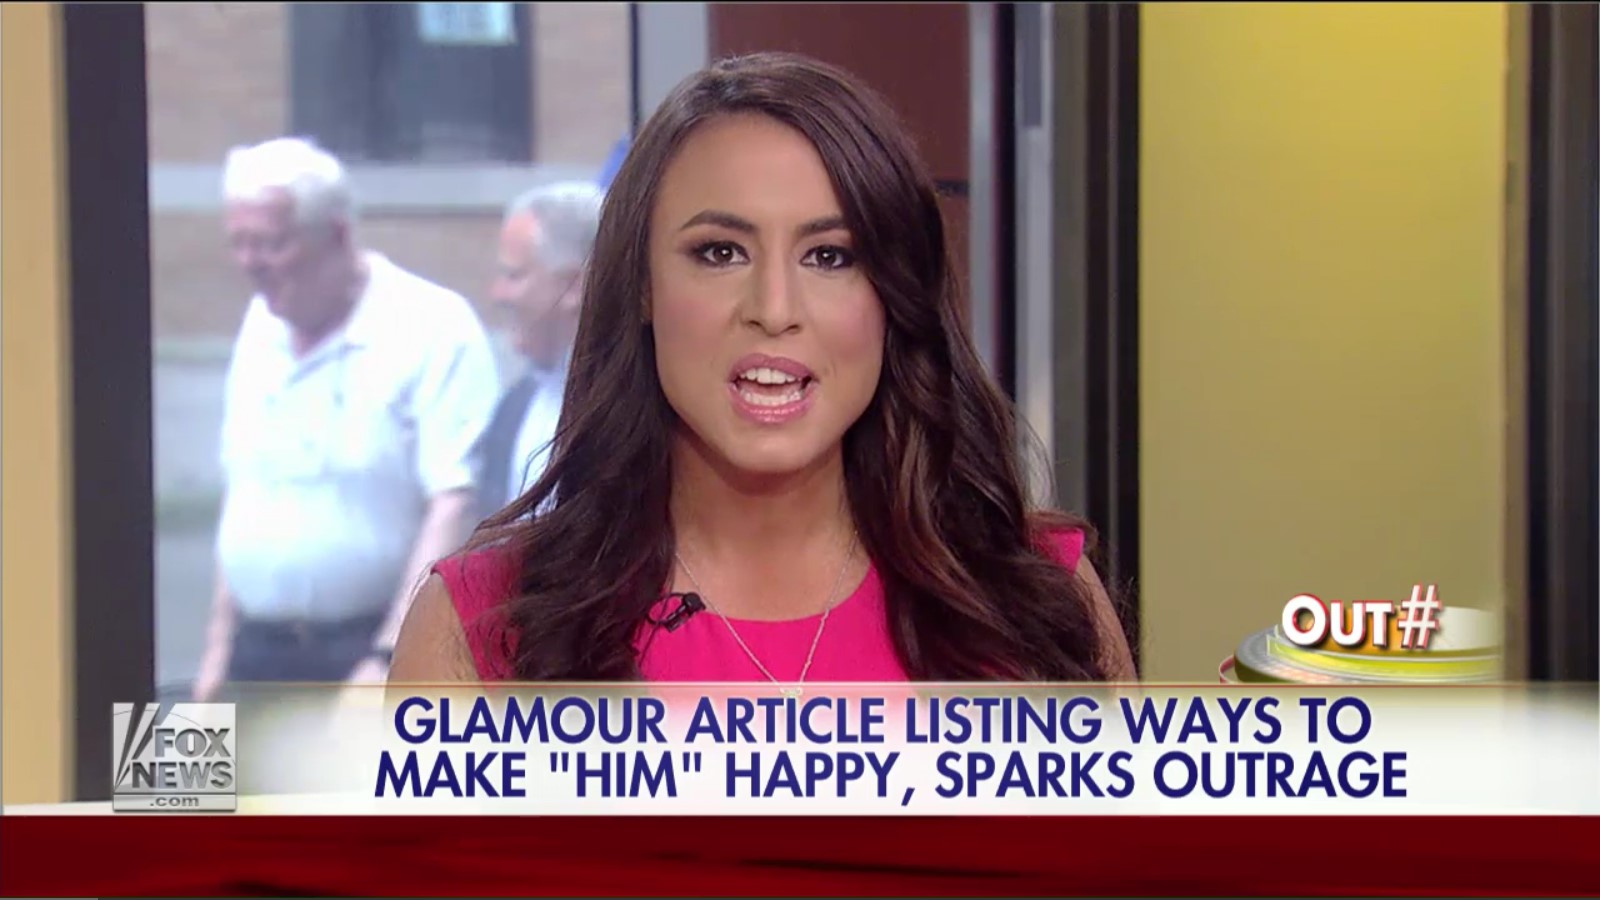 Fox’s Andrea Tantaros: Today’s Women Need To Make Their Men Sandwiches After Banging Them